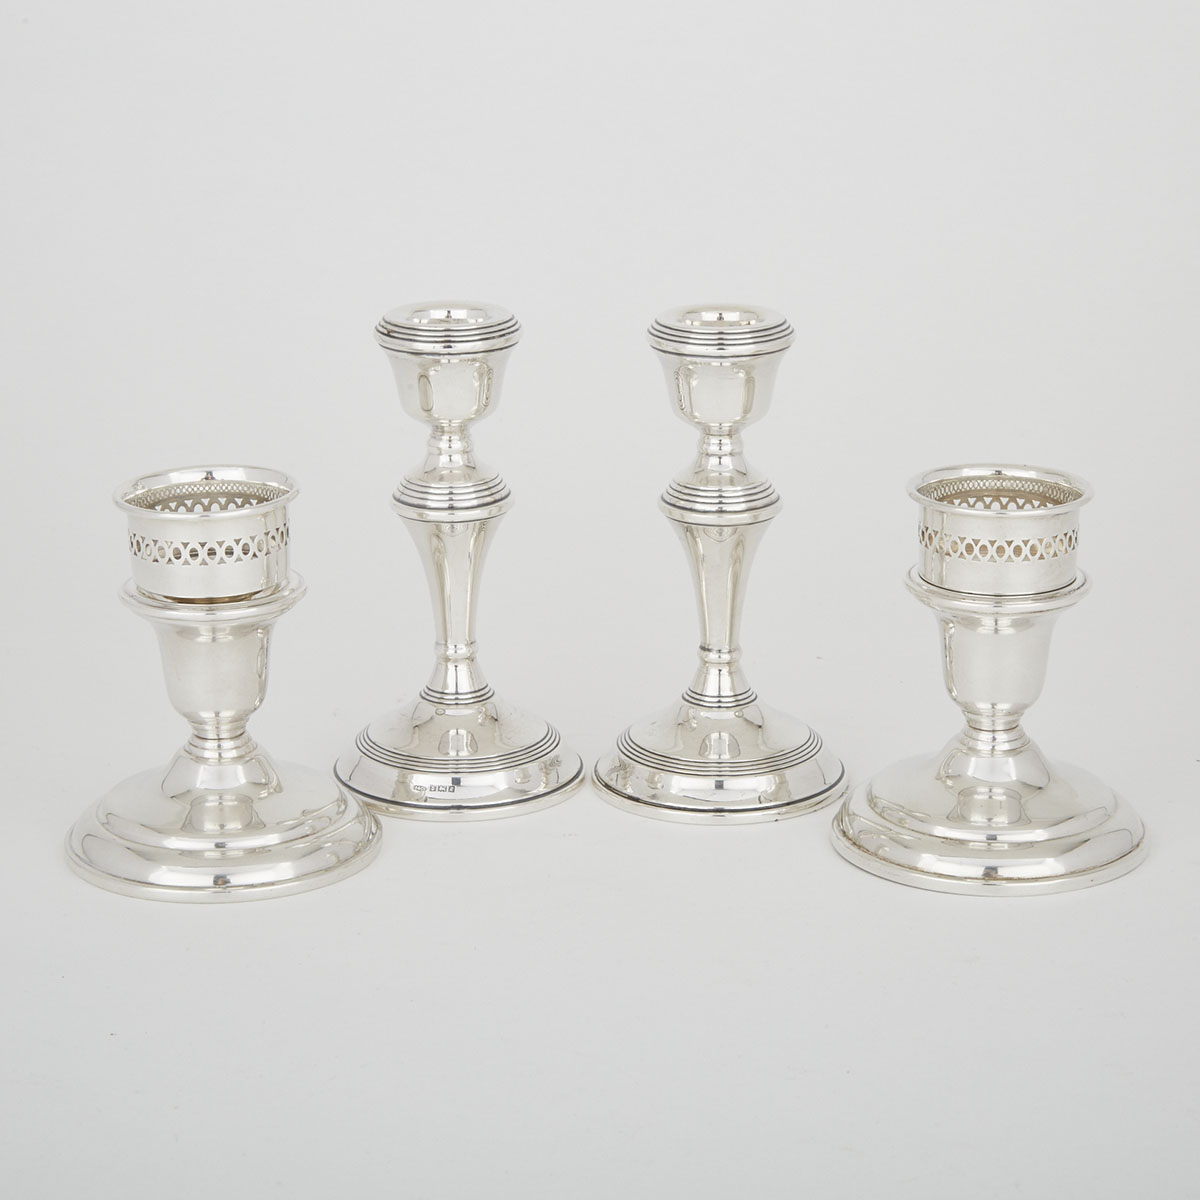 Pair of English Silver Candlesticks, Broadway & Co., Birmingham, 1966 and Another Pair, Henry Birks & Sons, Montreal, Que., 20th century